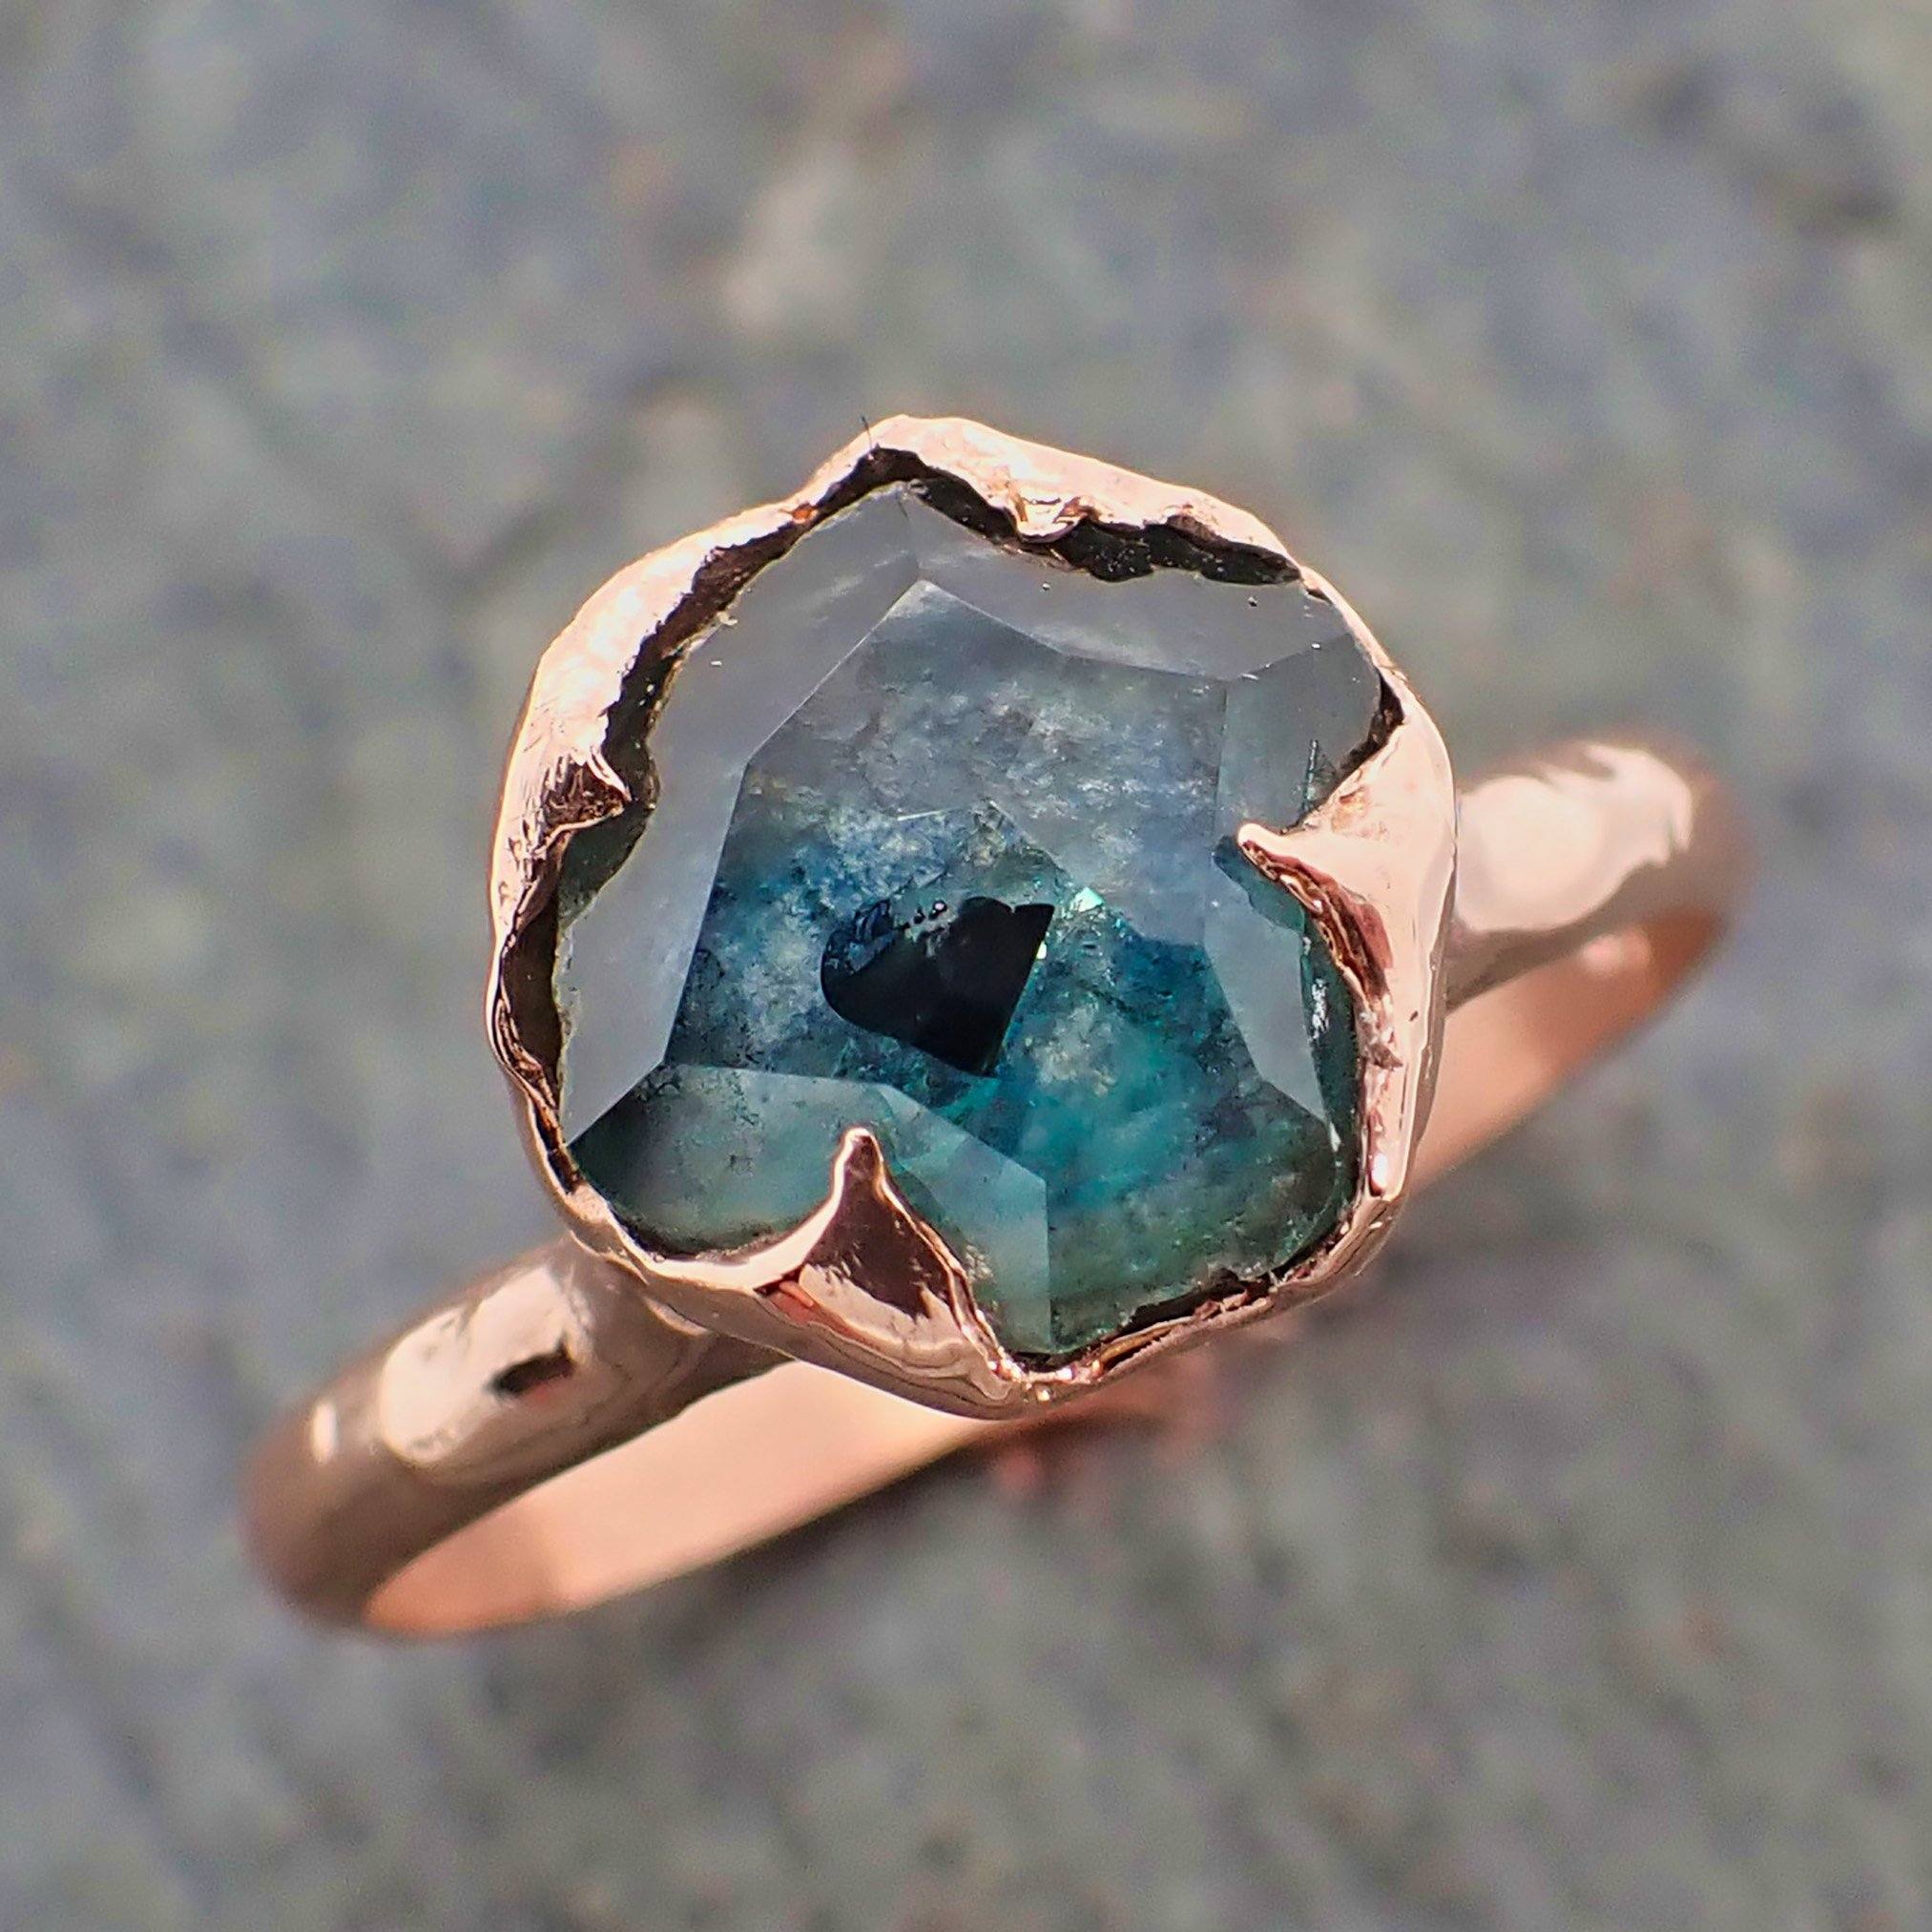 montana sapphire partially faceted solitaire 14k rose gold engagement ring wedding ring custom one of a kind blue gemstone ring 2170 Alternative Engagement